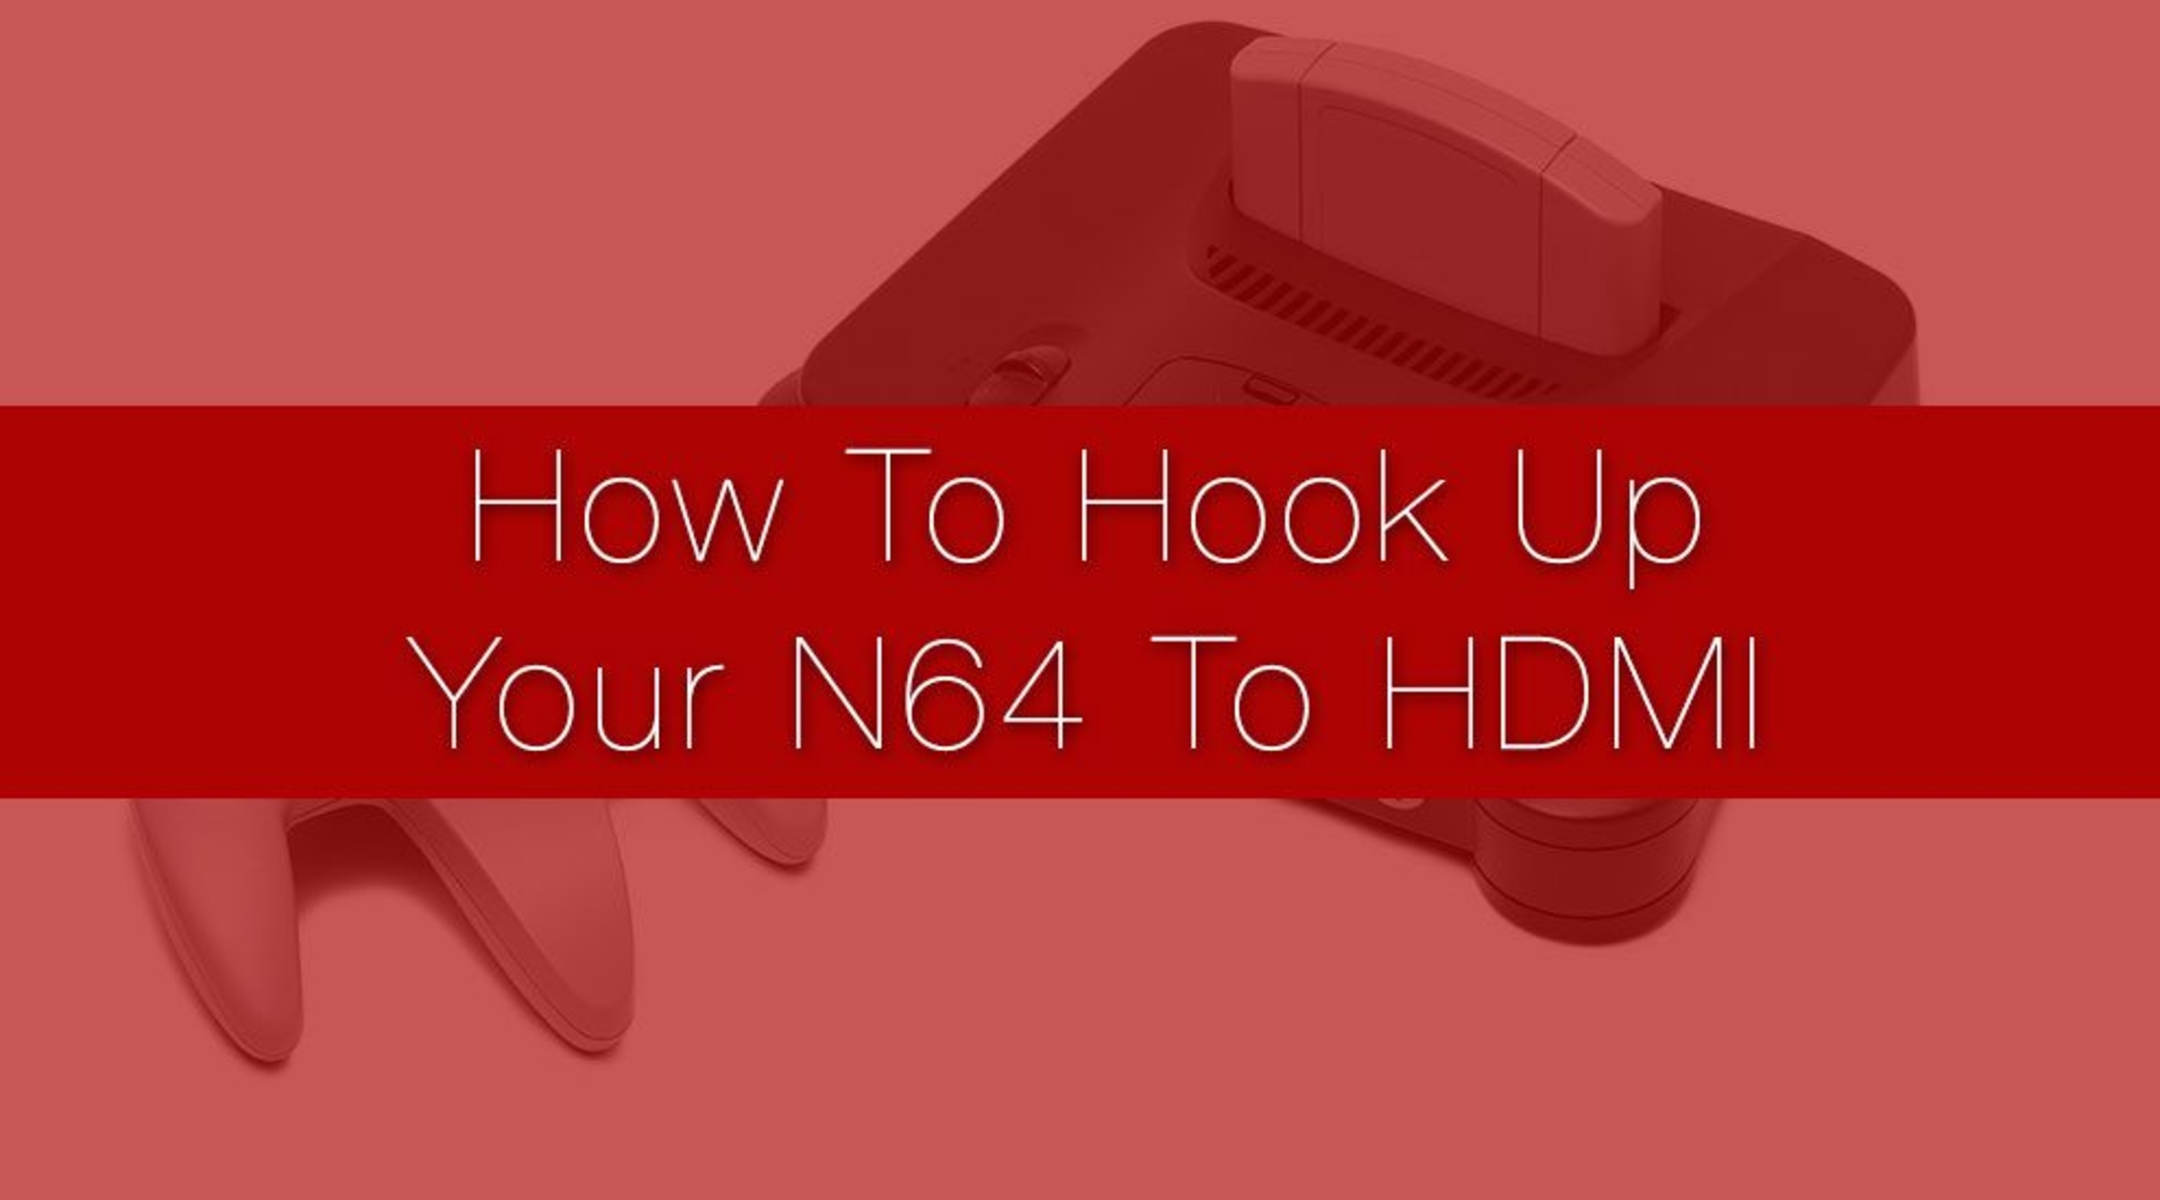 how-to-hook-up-n64-to-hdmi